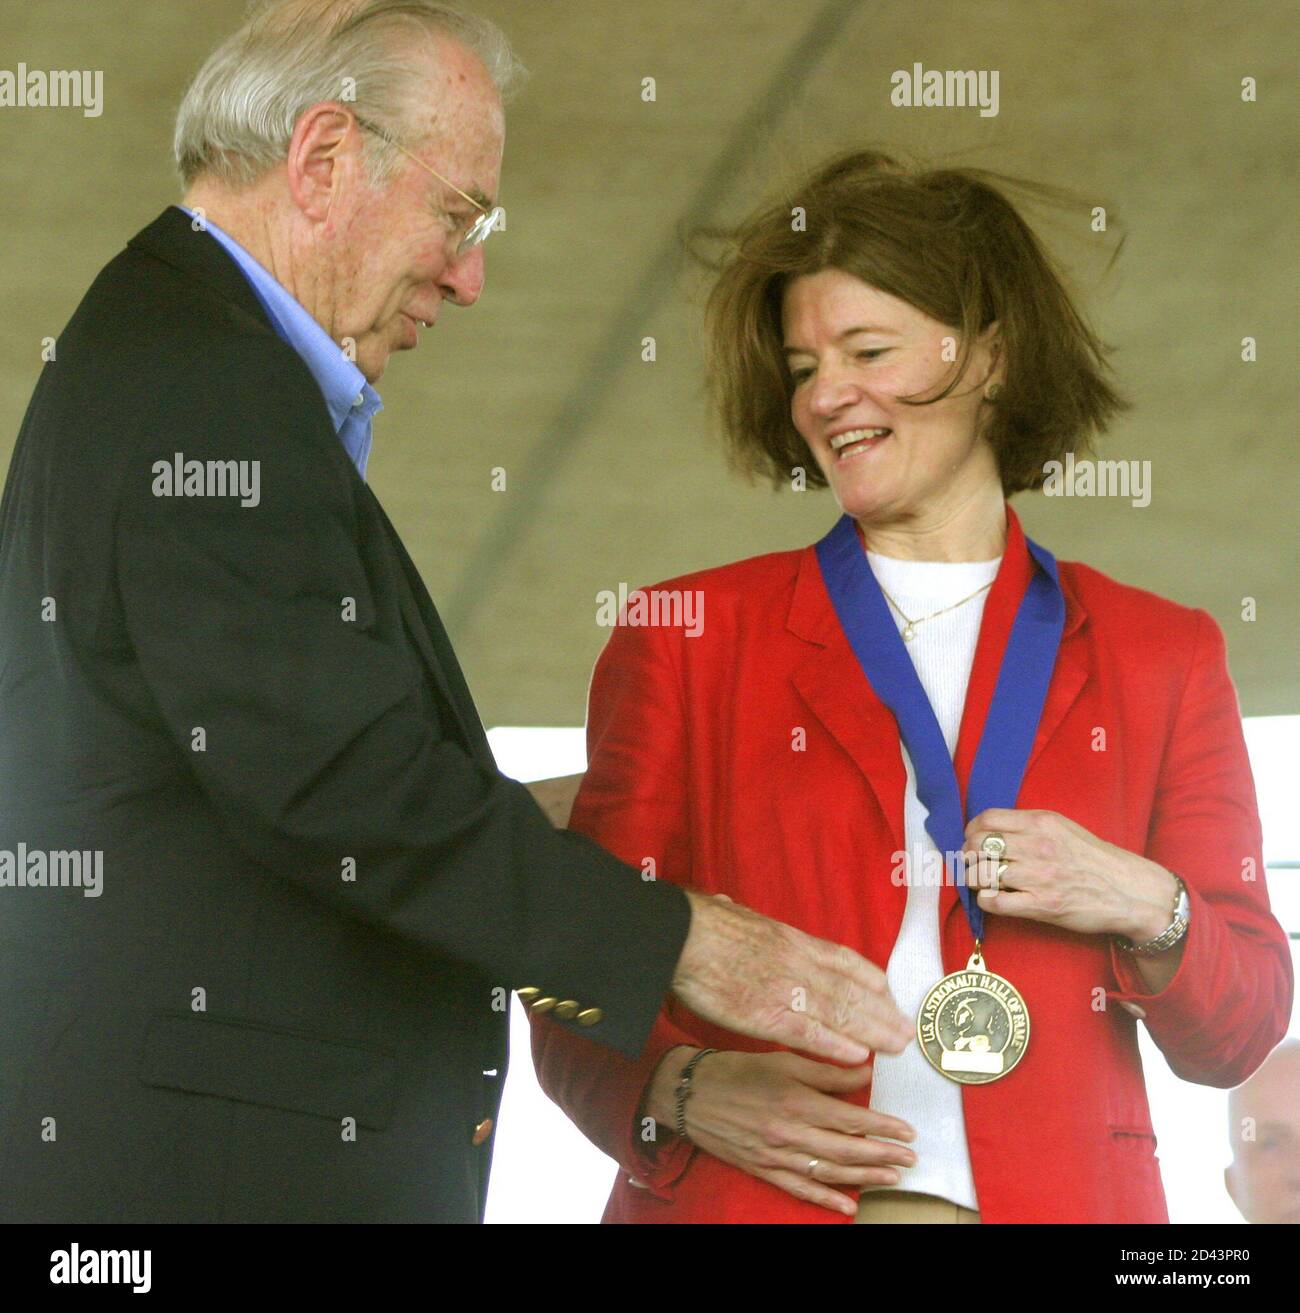 Former shuttle astronaut Sally Ride (R) is congratulated by former Apollo 13 Commander James Lovell (L) after being inducted into the Astronaut Hall of Fame in Titusville, Florida on June 21, 2003. Ride was one of four astronauts honored at the Kennedy Space Center Visitor Complex, and was the first American woman to fly in space. REUTERS/Charles W. Luzier  CWL/GAC Stock Photo